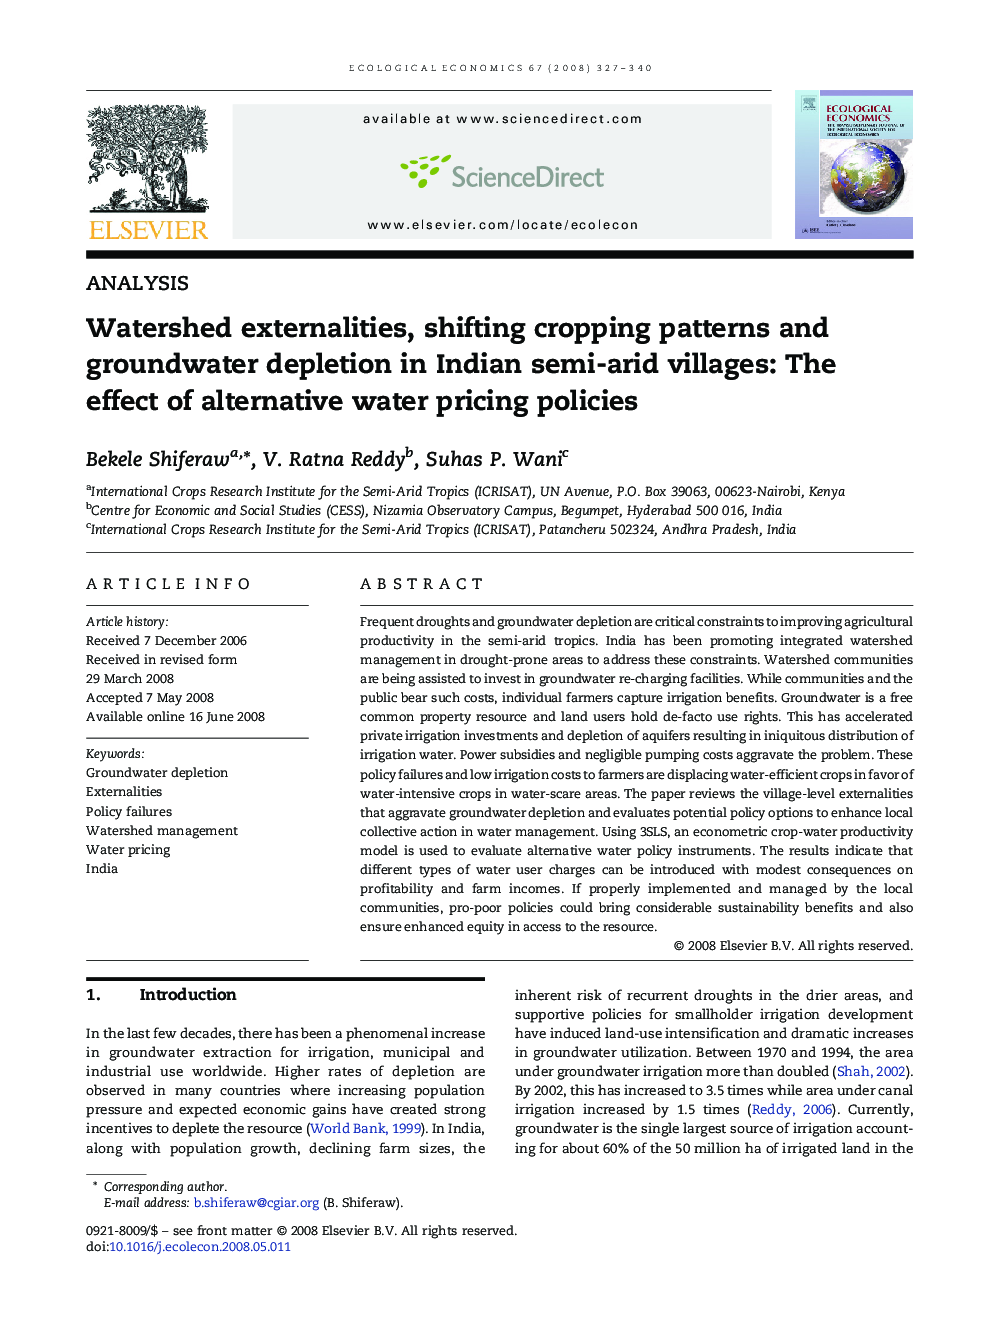 Watershed externalities, shifting cropping patterns and groundwater depletion in Indian semi-arid villages: The effect of alternative water pricing policies